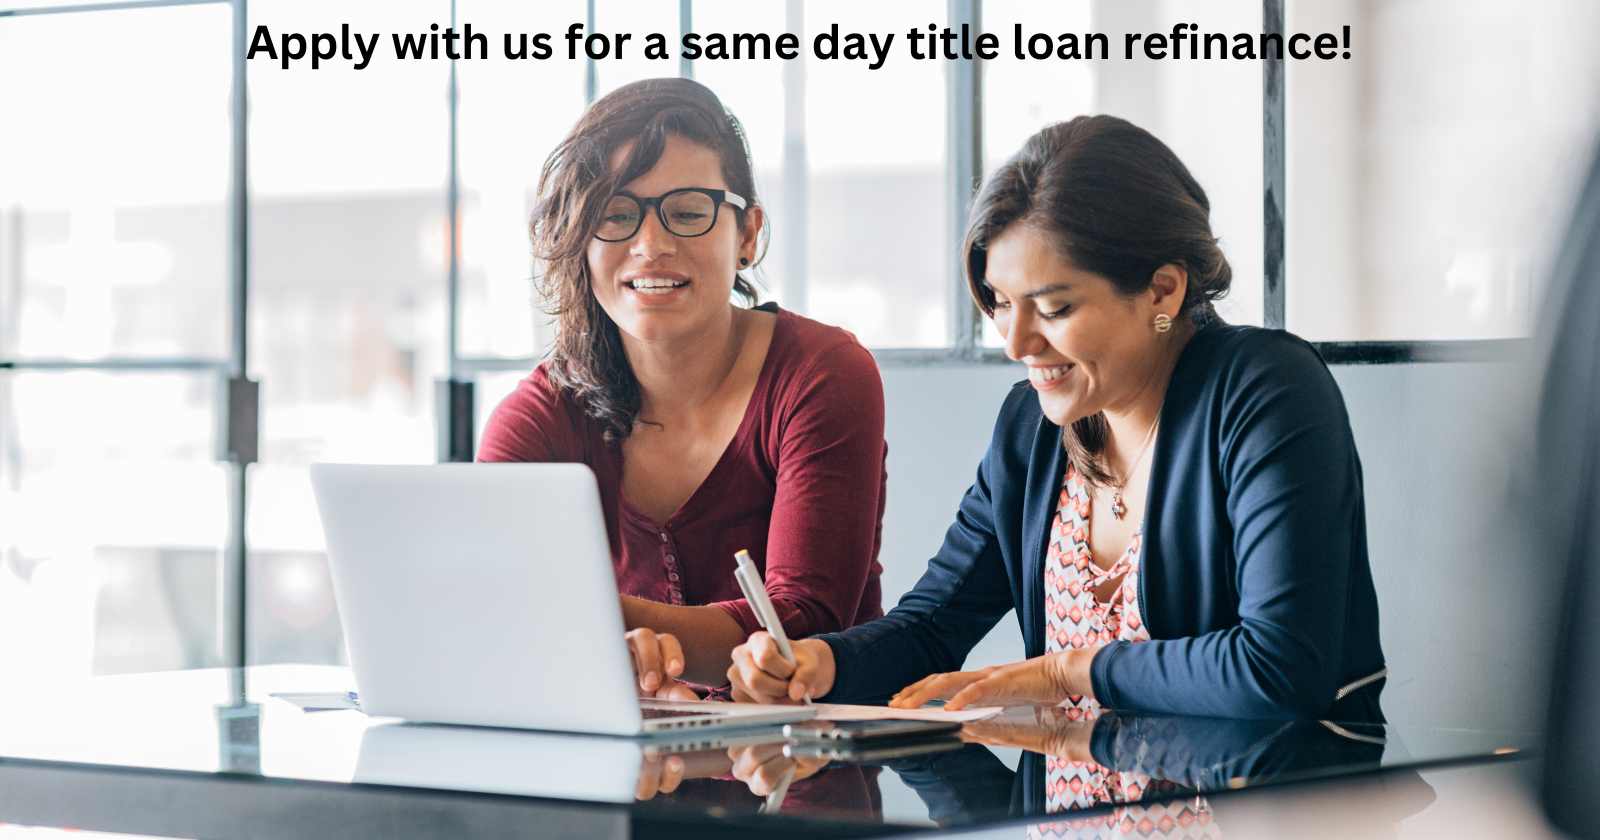 Apply with us to refinance your existing title loan.